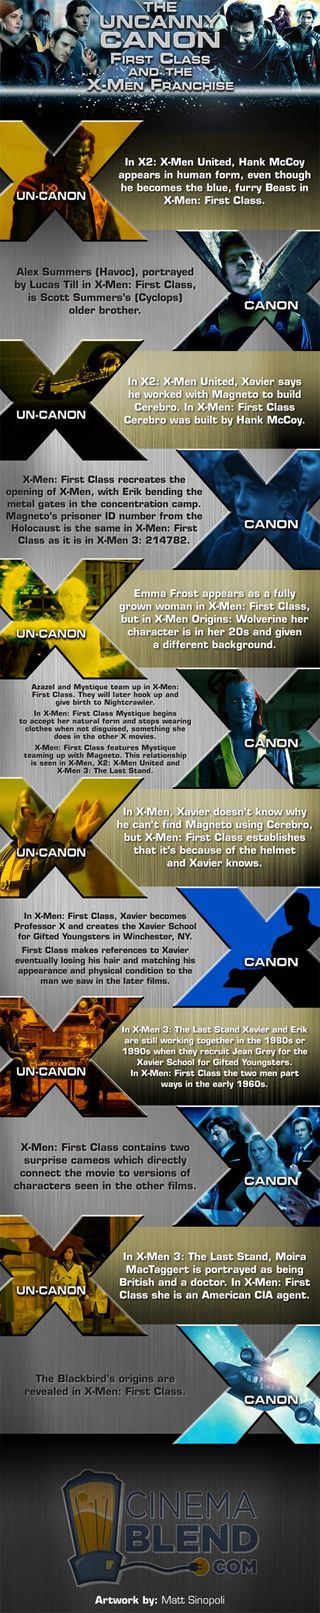 x-men: first class canon infographic